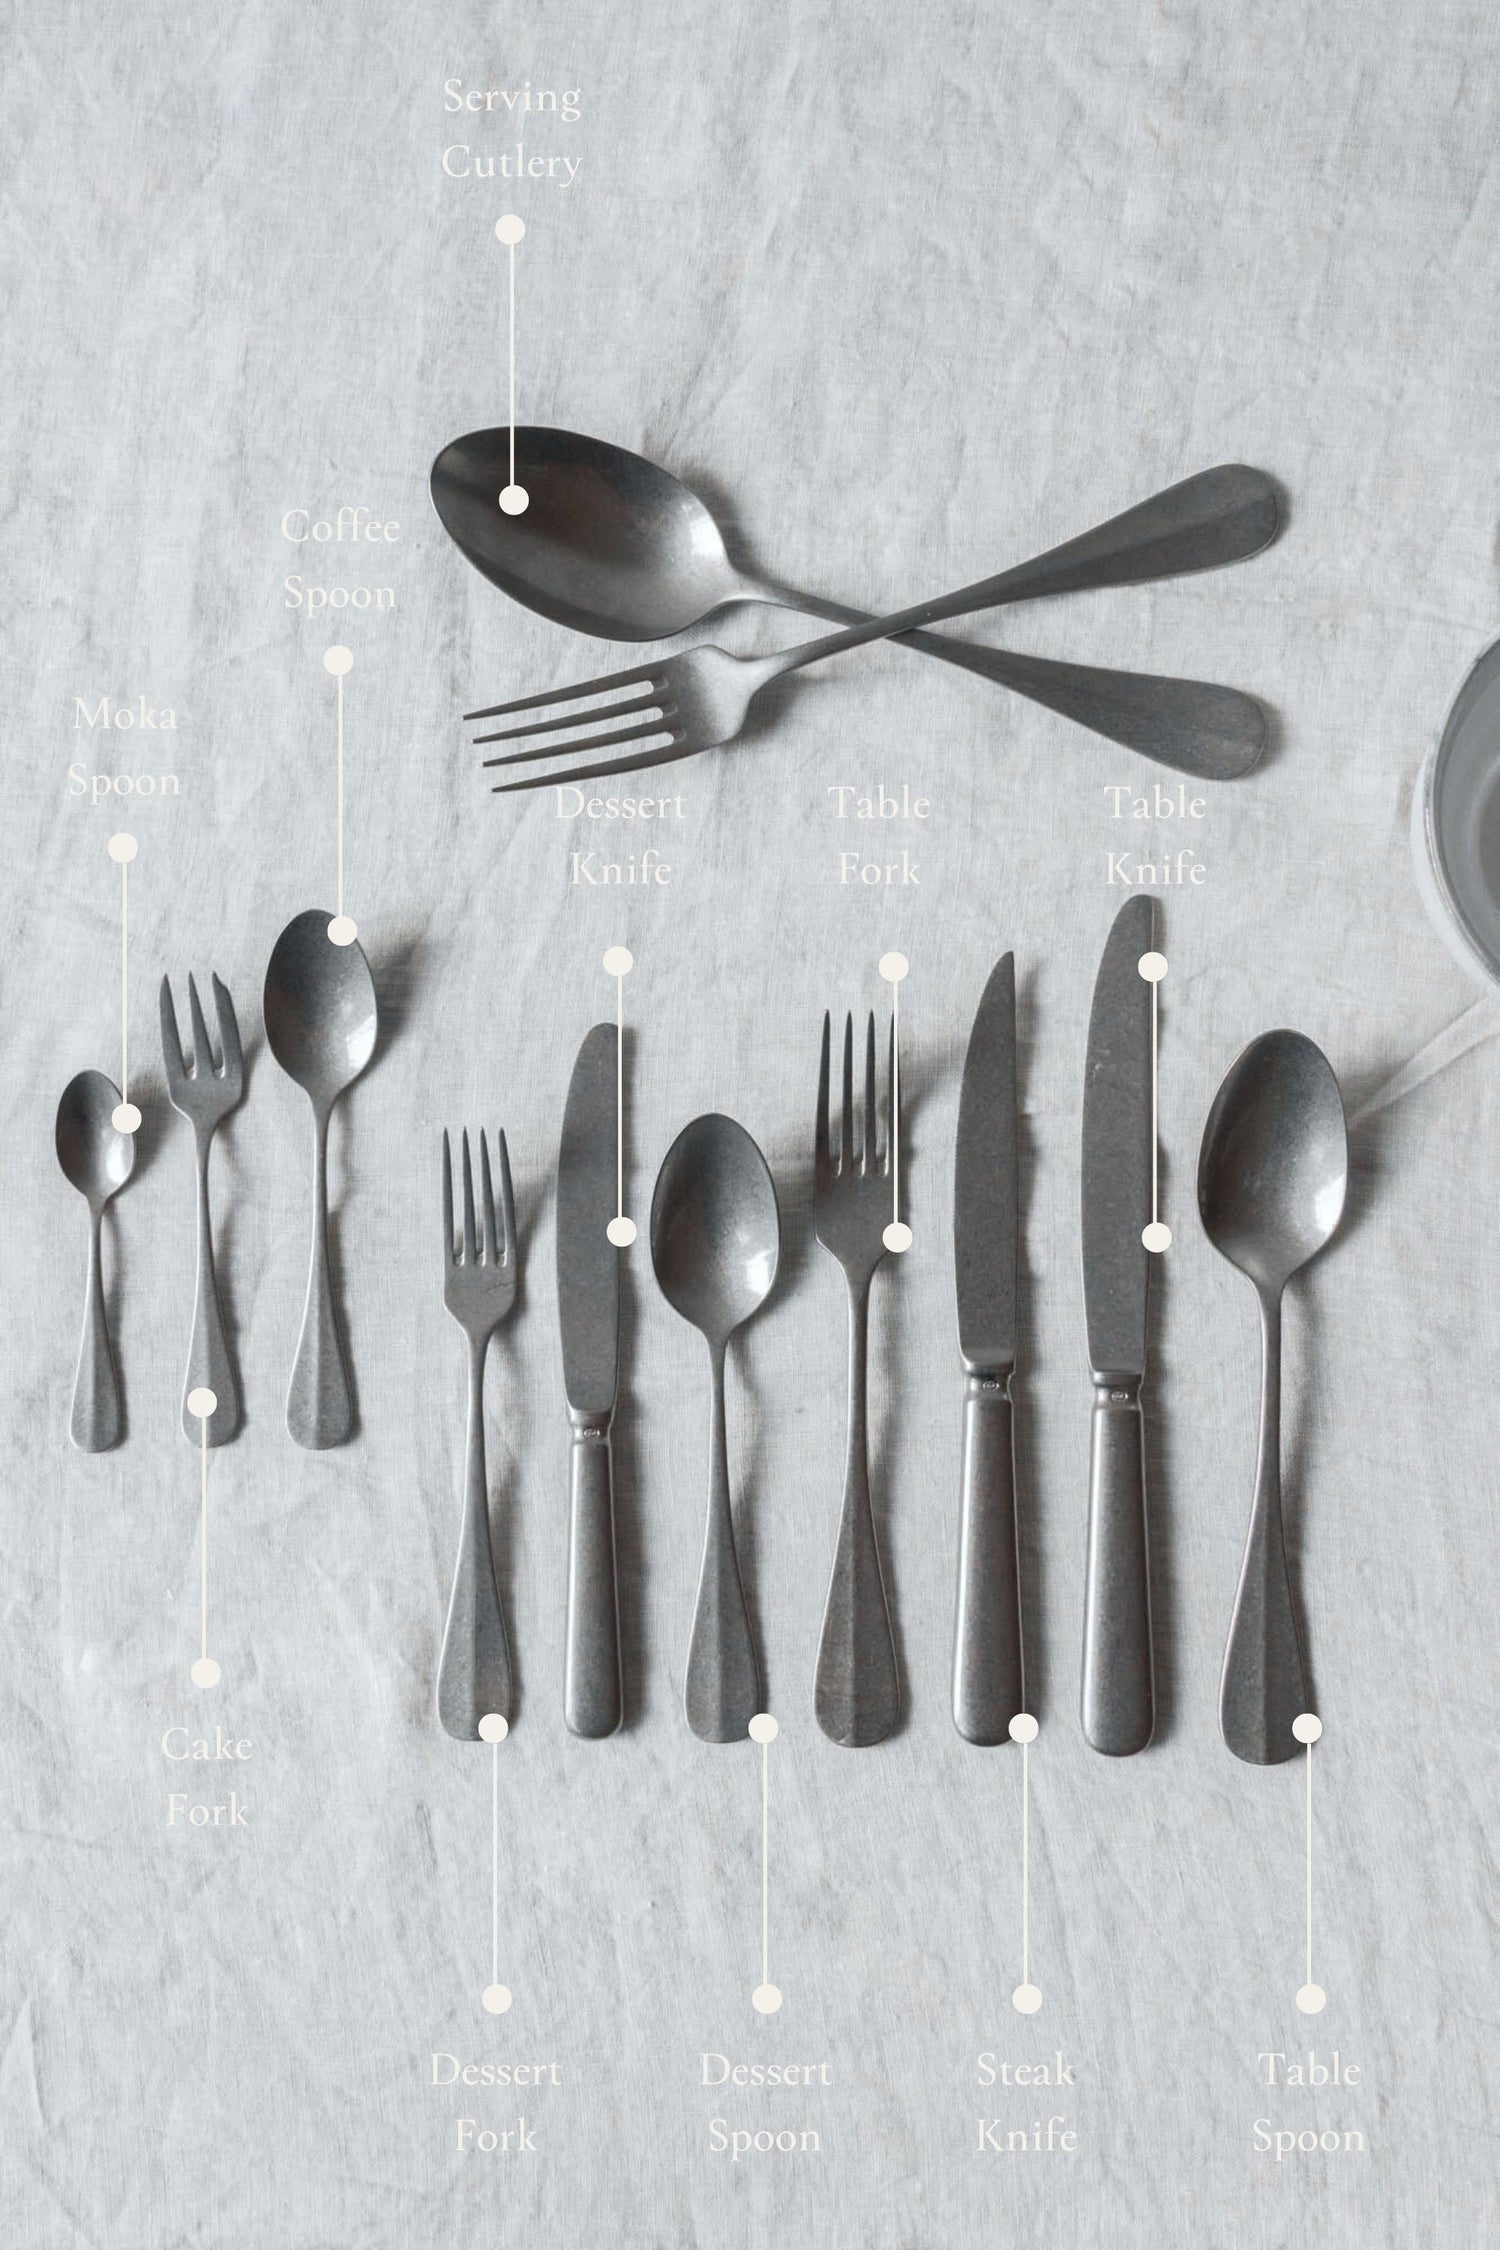 Overview of the Baguette Vintage Cutlery collection by Sambonet.